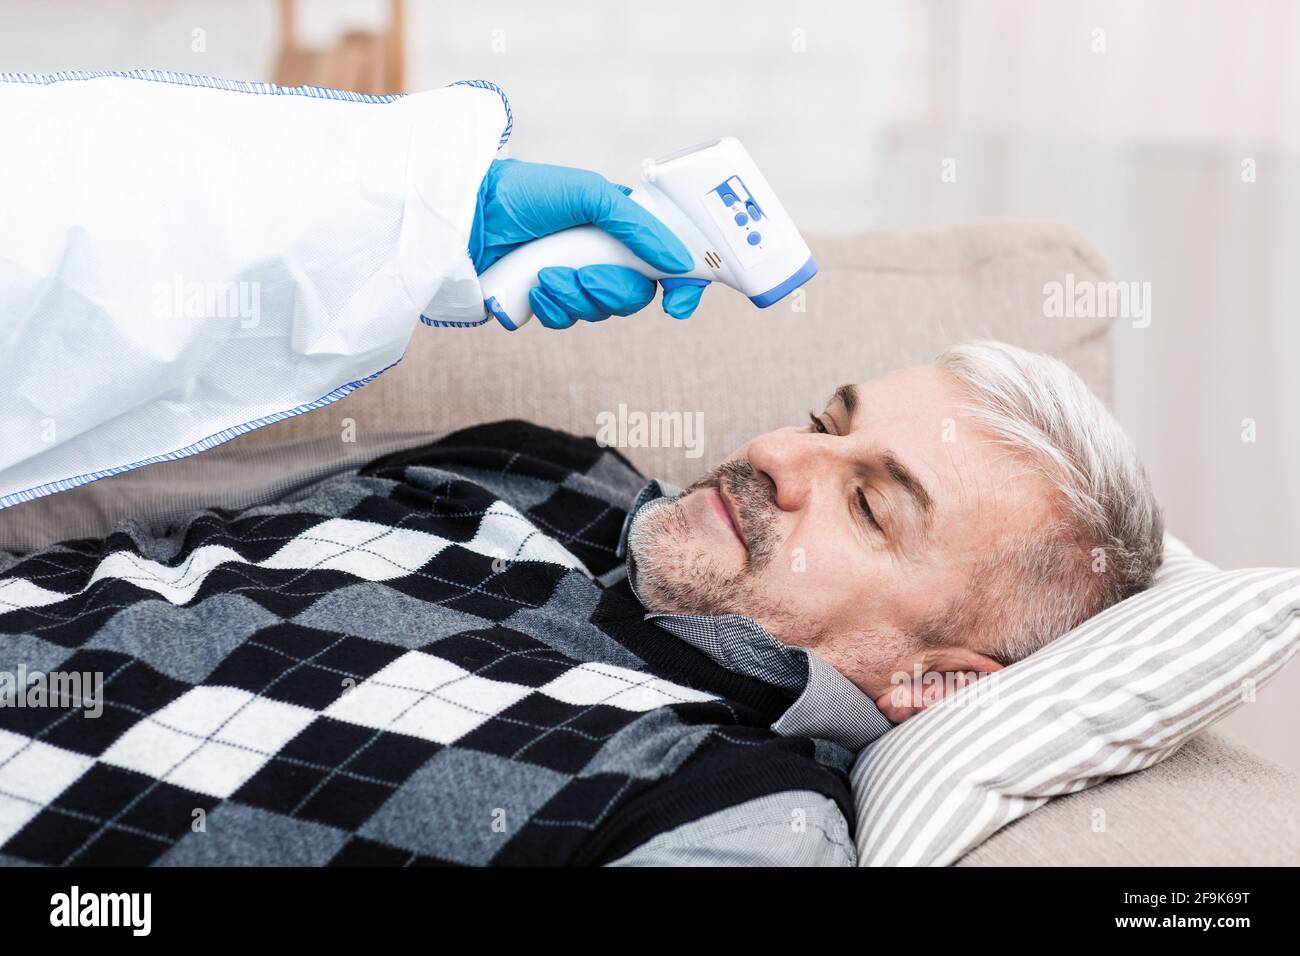 Caring for patient during covid-19 quarantine, examination of elderly person at home Stock Photo